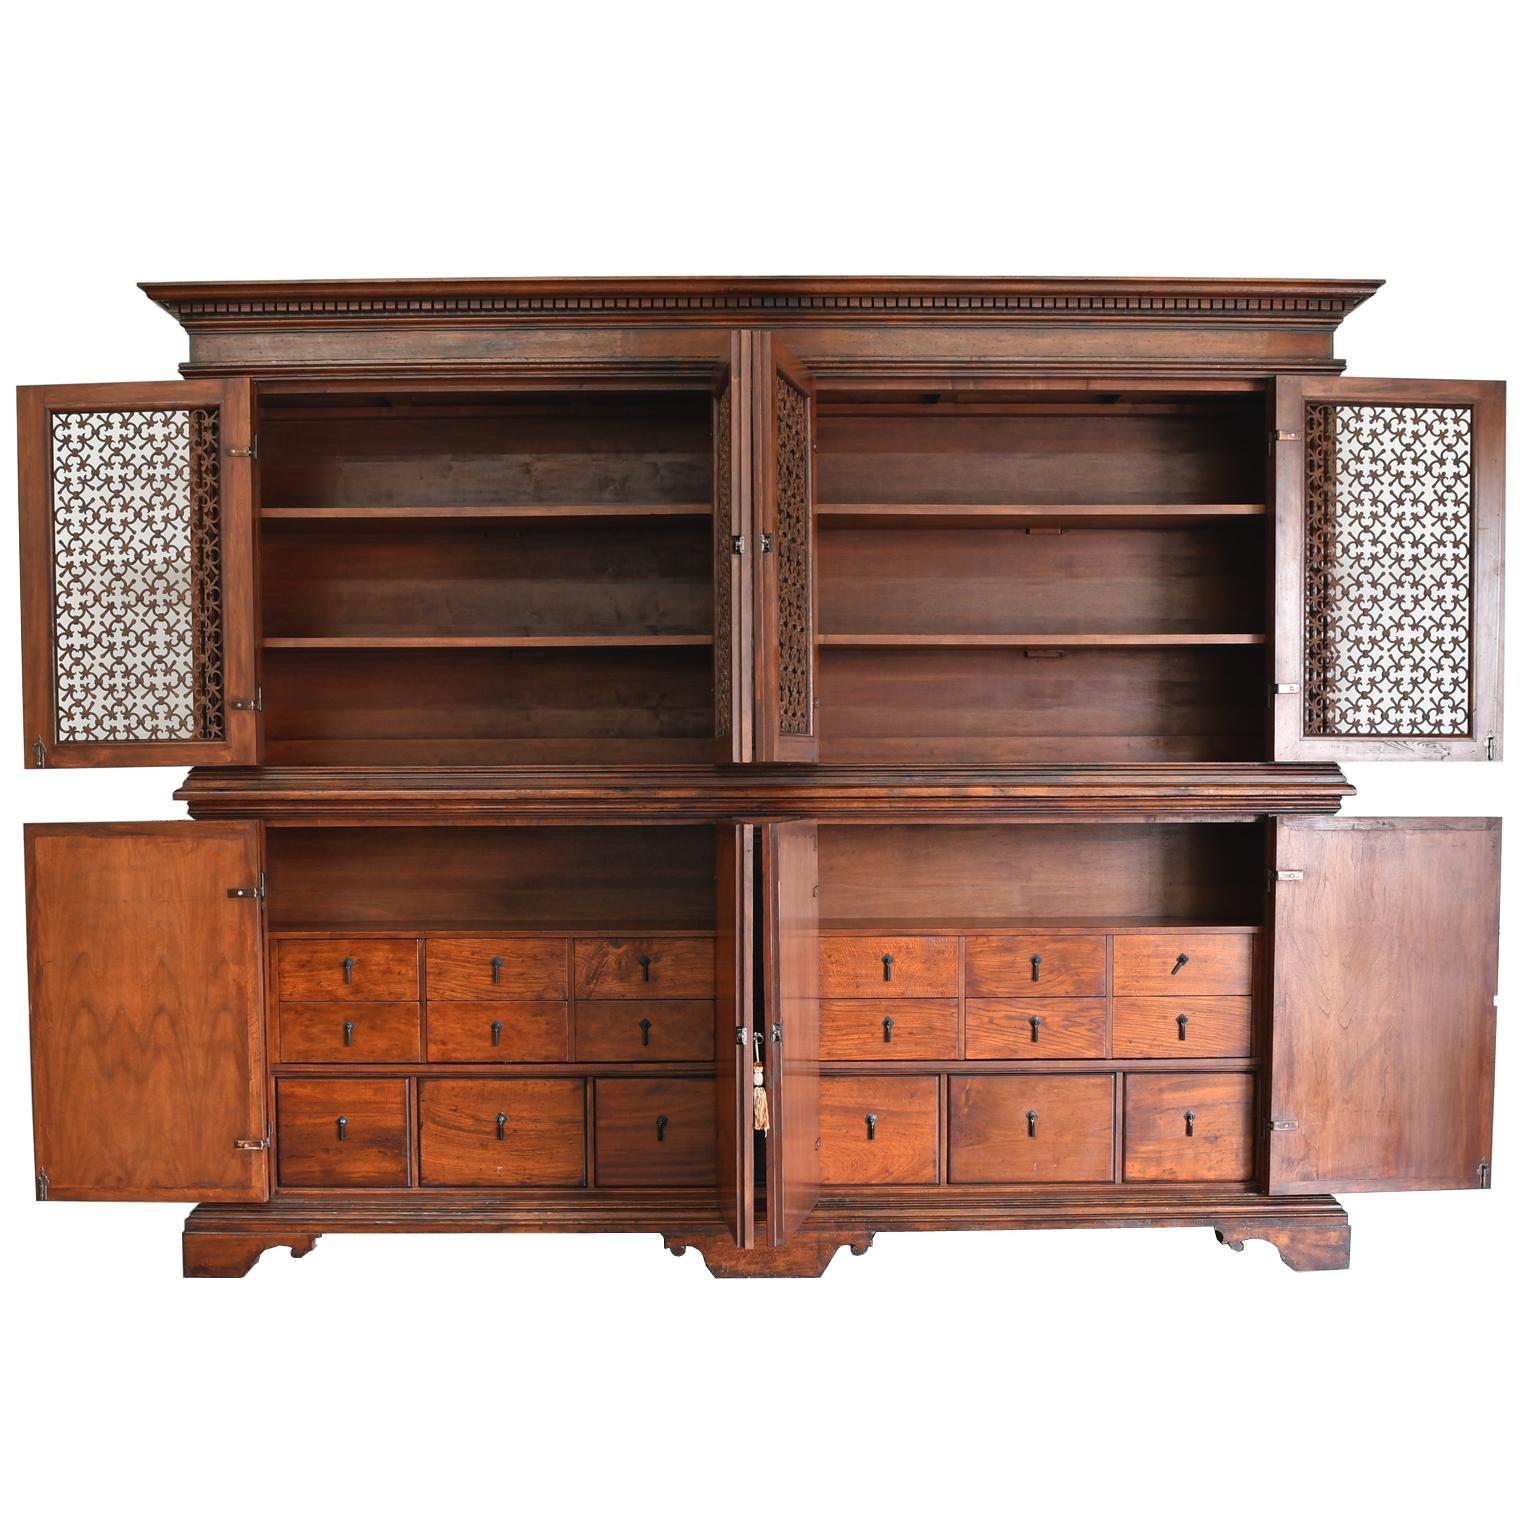 A magnificent Italian Renaissance-style bookcase cabinet that was faithfully copied from an original 17th century Italian Renaissance Tuscan Archival. The upper bookcase has inset hand forged iron quatrefoil panels in its four doors with interior